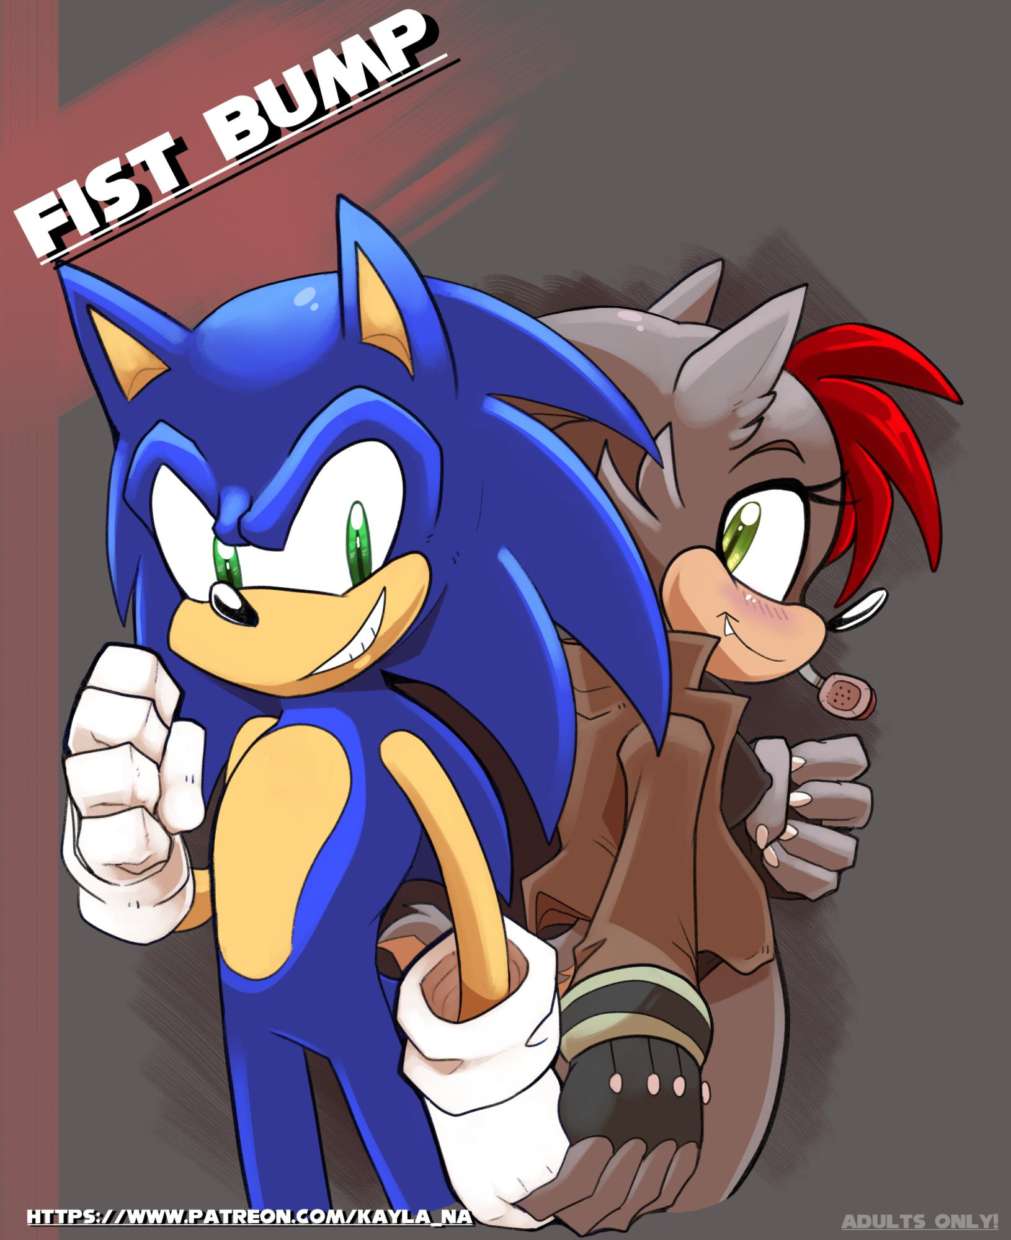 Fist Bump English page00 Cover_ _81043729 1630x2000.png